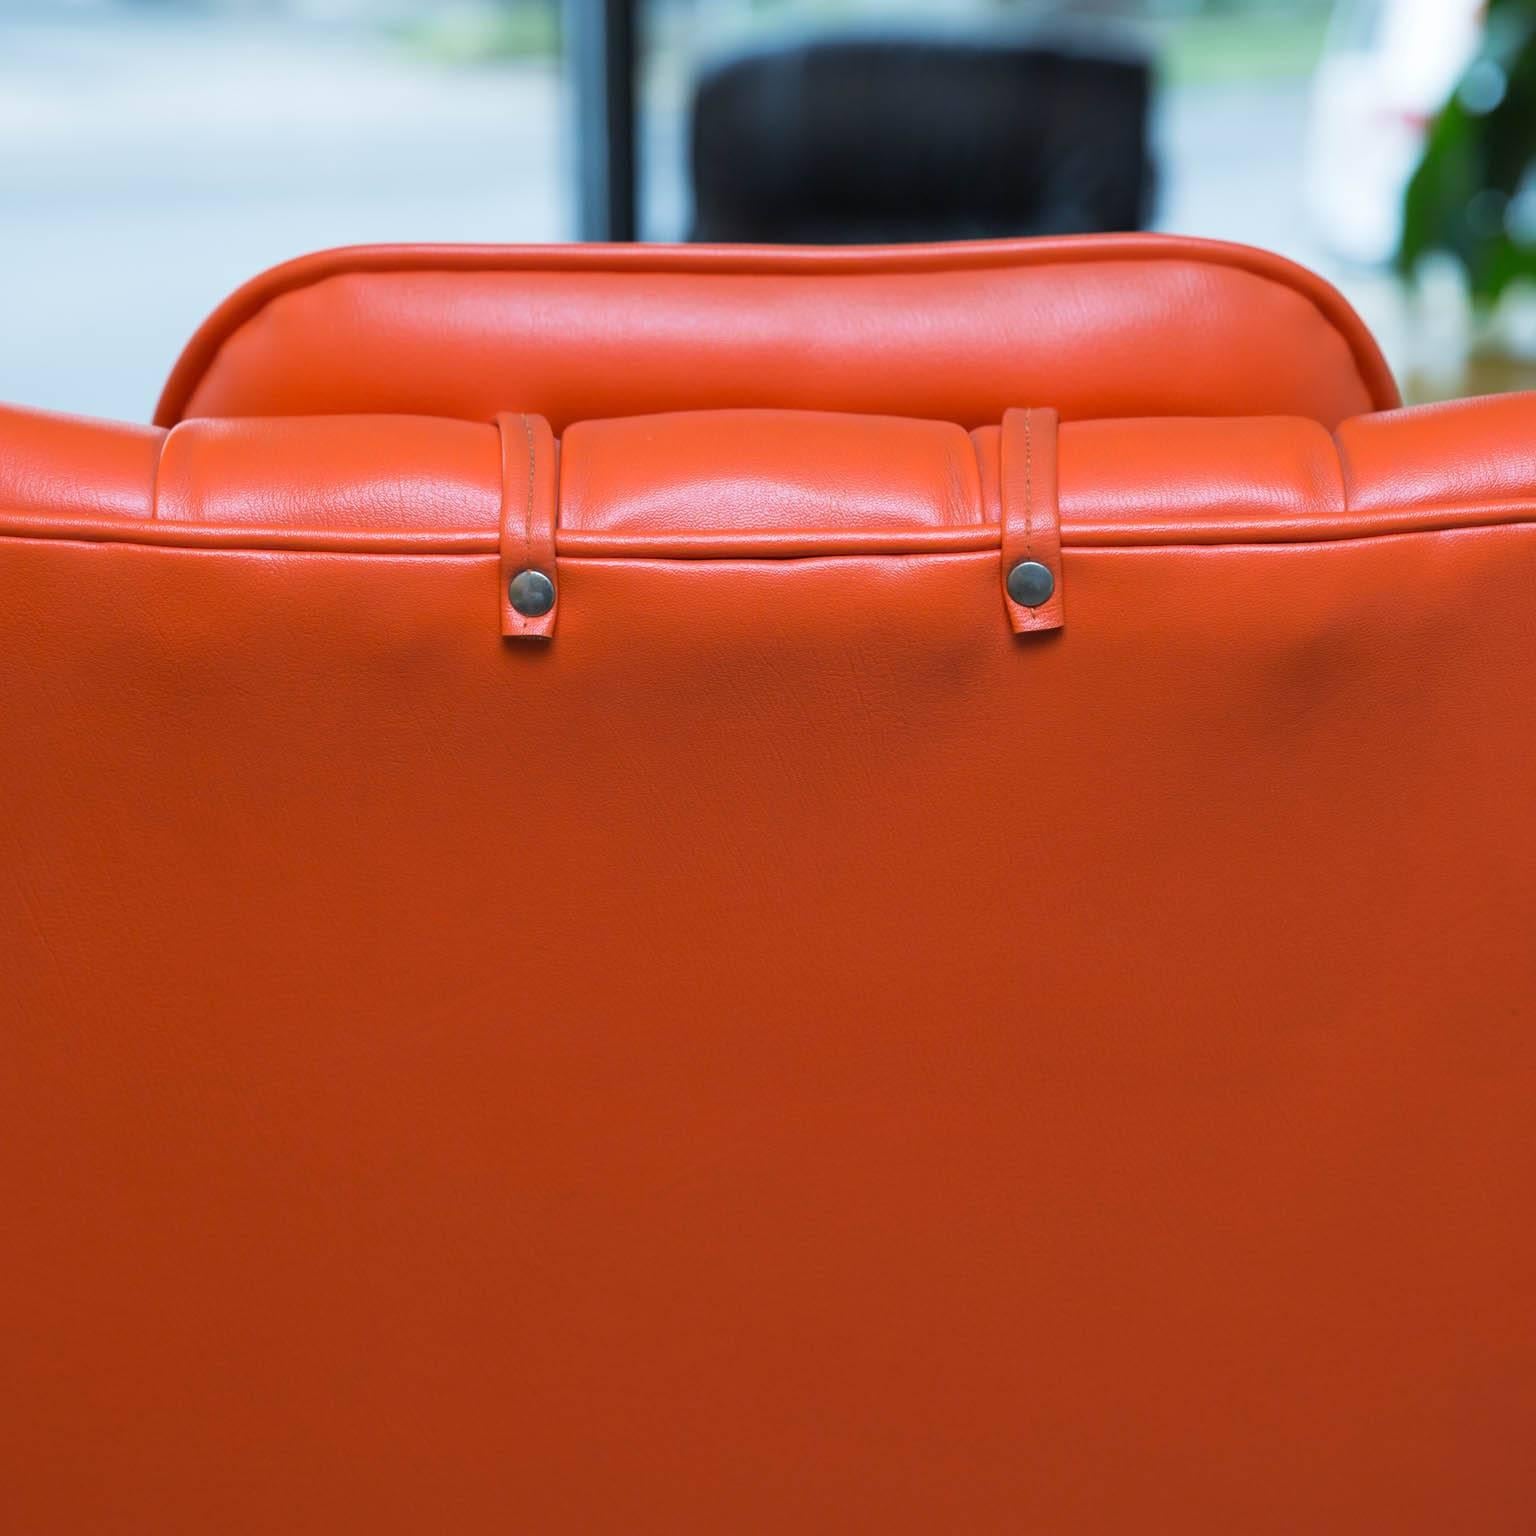 Iconic Mulhauser lounge chair in classic Mid-Century style orange naugahyde on a rare solid aluminum base.